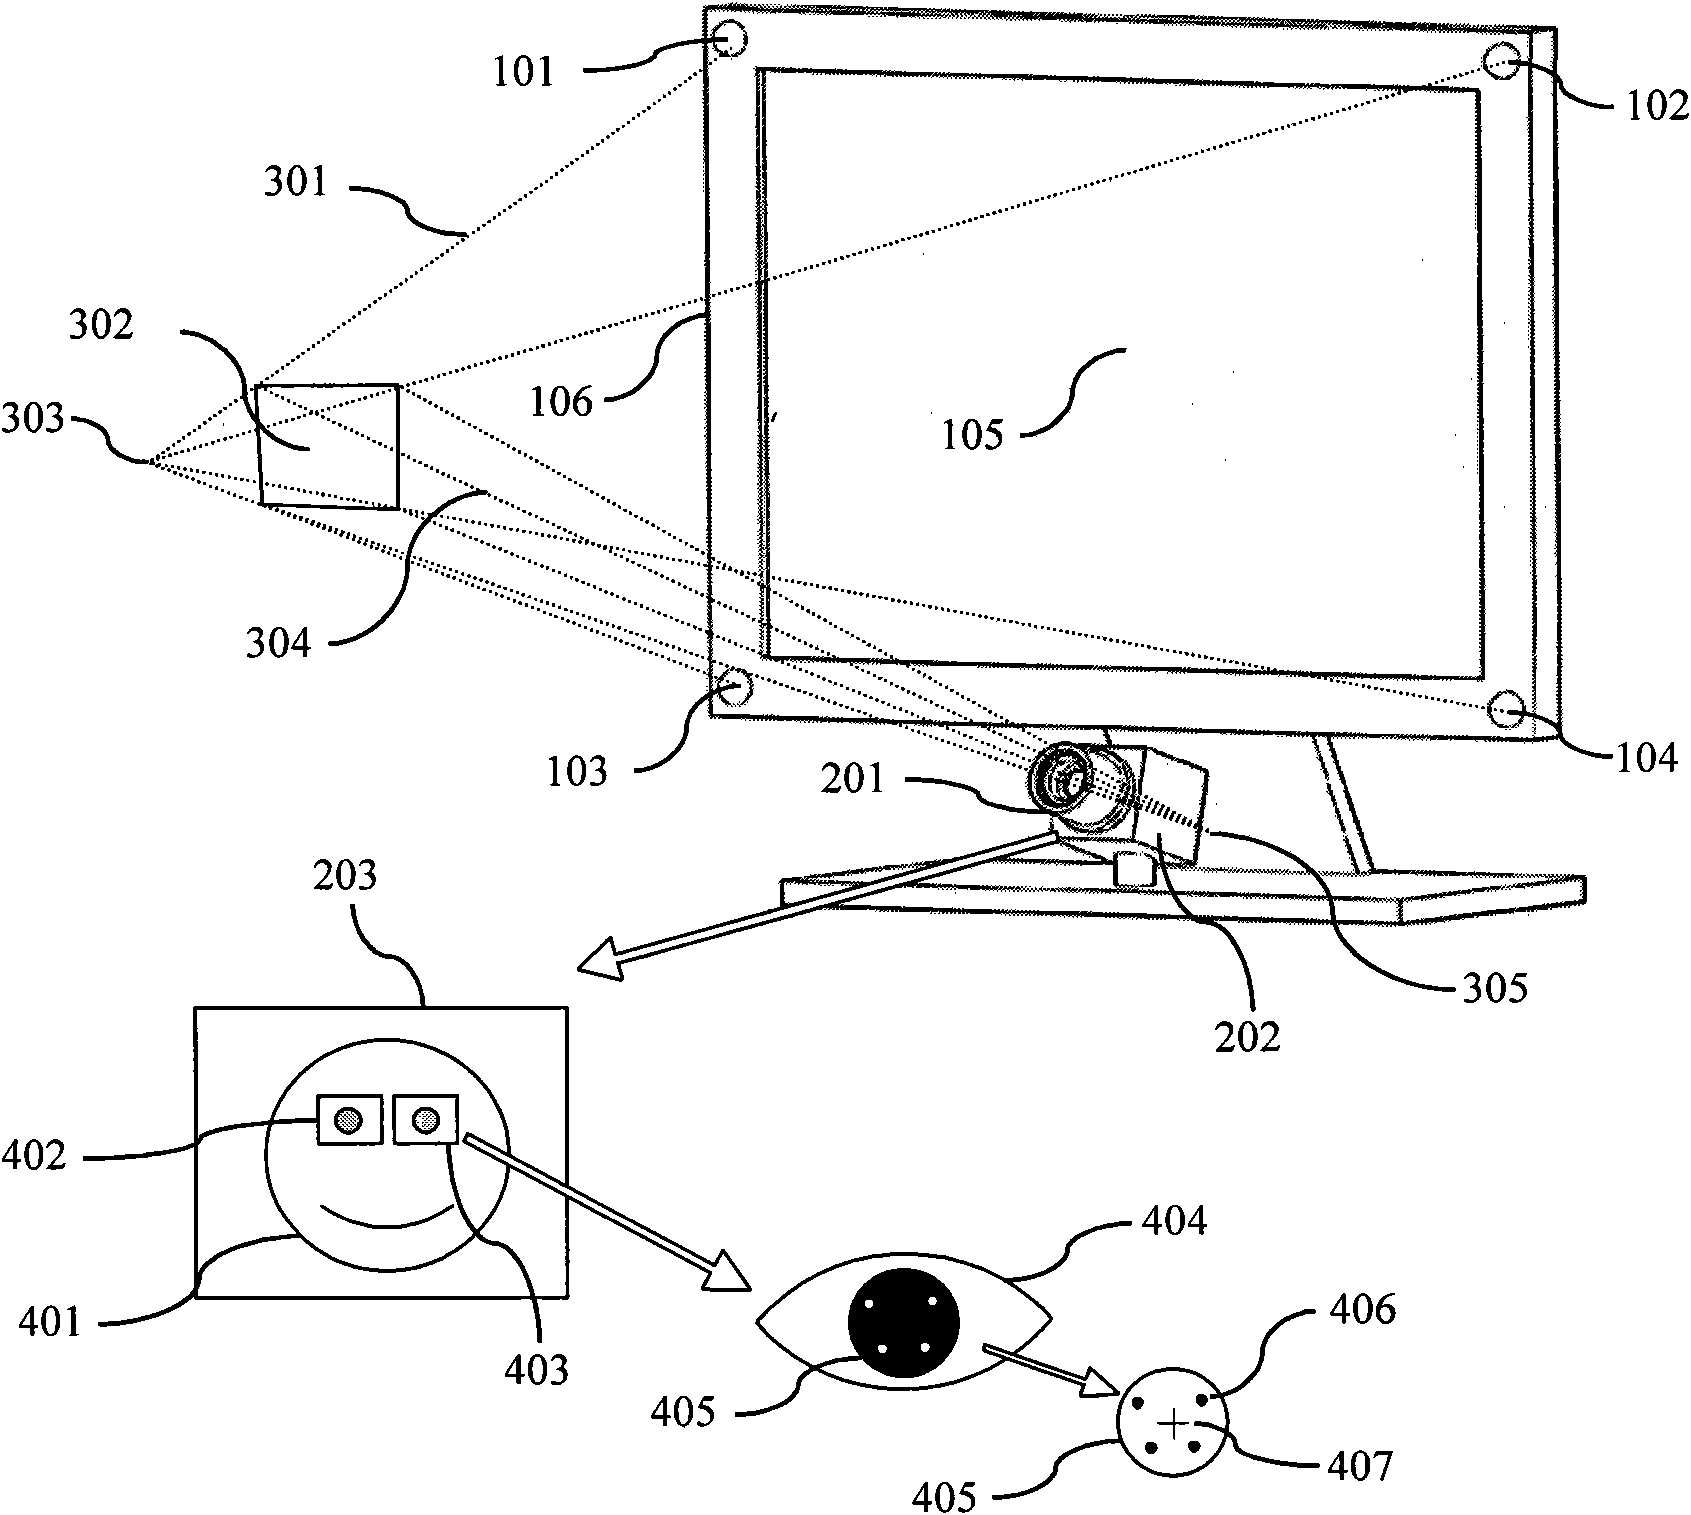 Human-computer interaction device and method adopting eye tracking in video monitoring